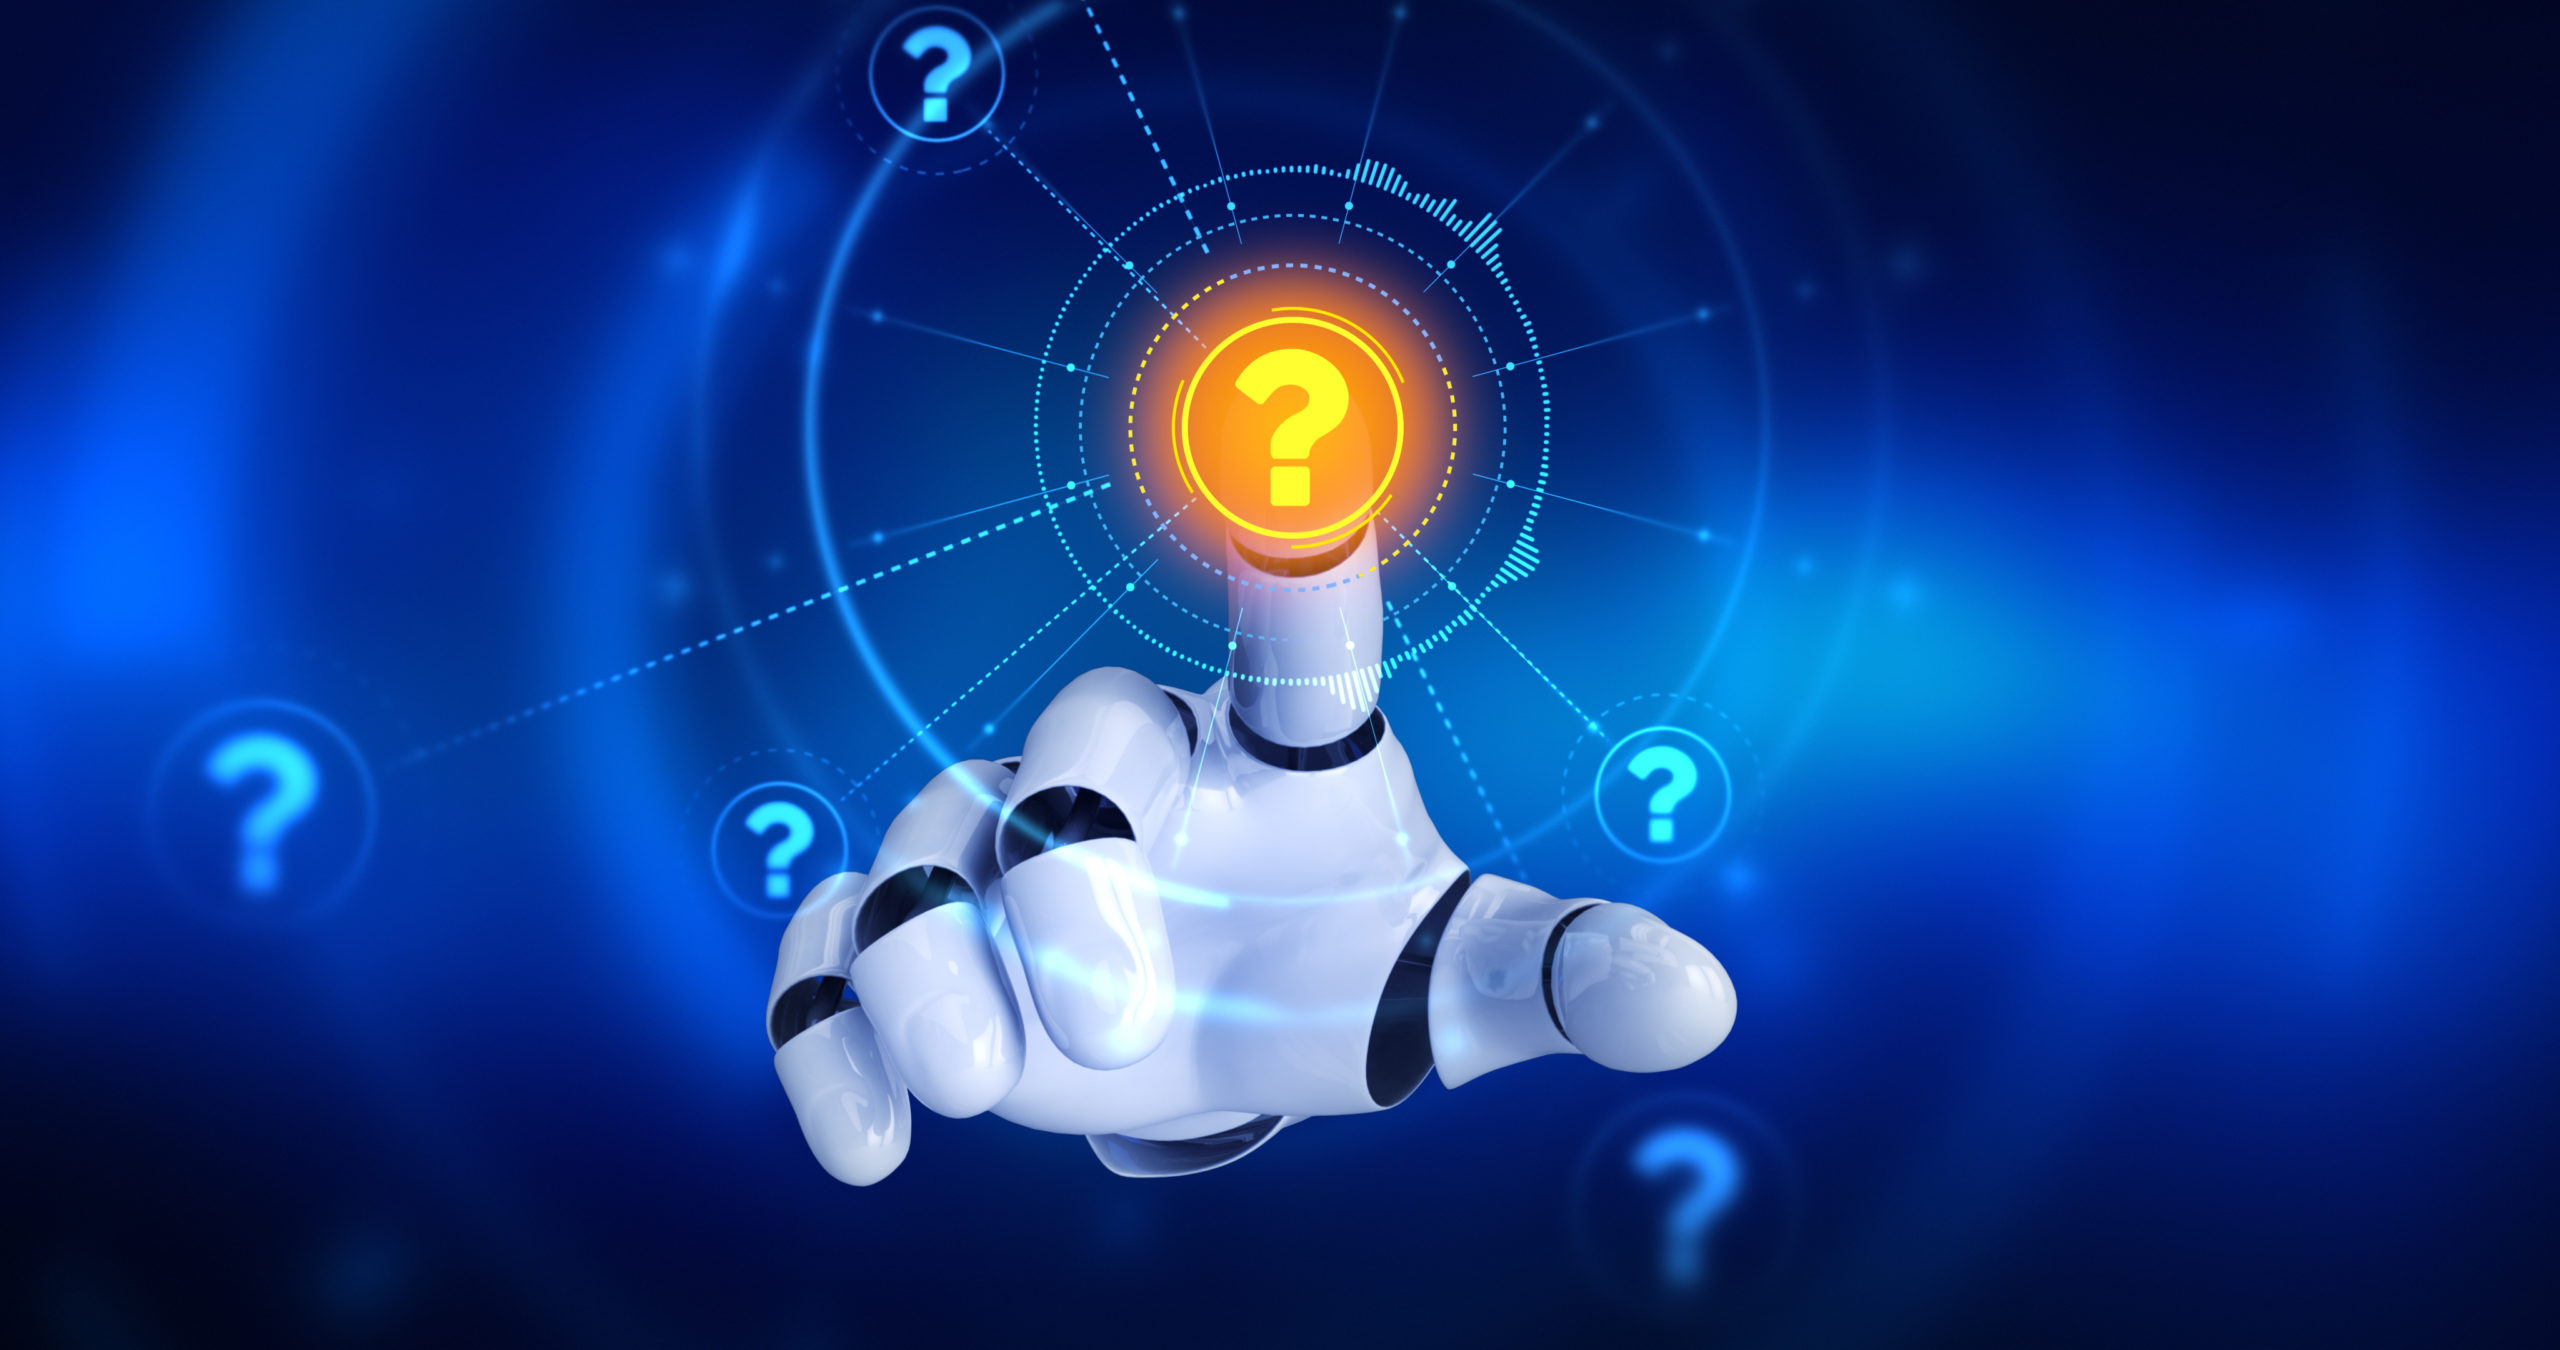 https://itknowledgezone.com/wp-content/uploads/2020/01/Questions-to-AI-Vendors-scaled-1.jpg